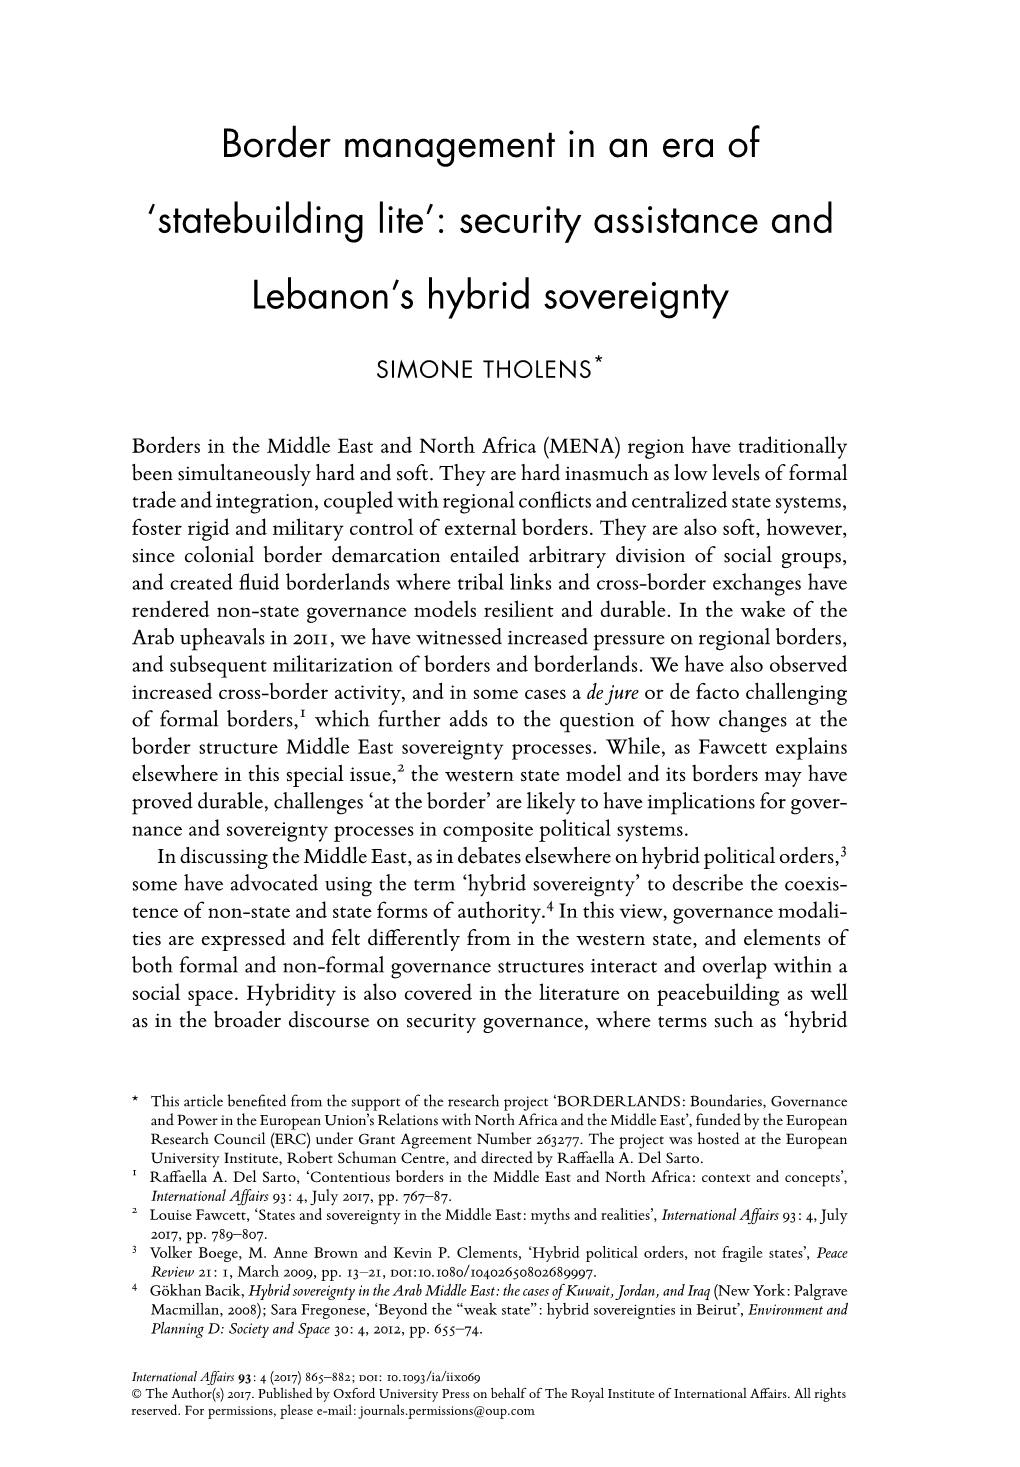 'Statebuilding Lite': Security Assistance and Lebanon's Hybrid Sovereignty